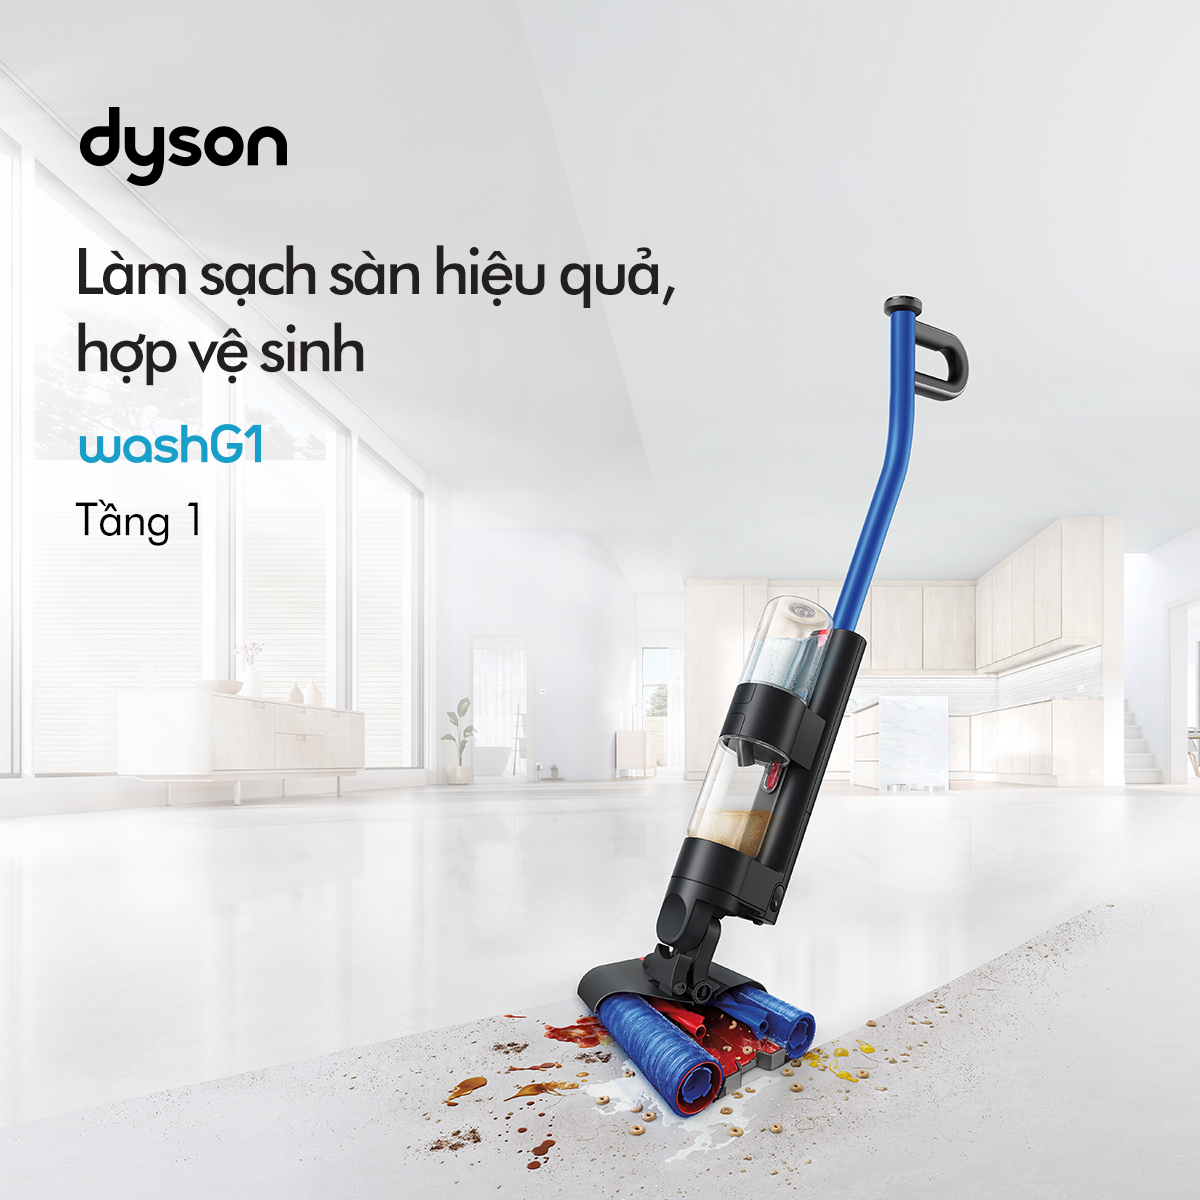 DYSON WASH G1 - A NEW BREAKTHROUGH IN CLEANING TECHNOLOGY FOR YOUR HOME 🏠✨